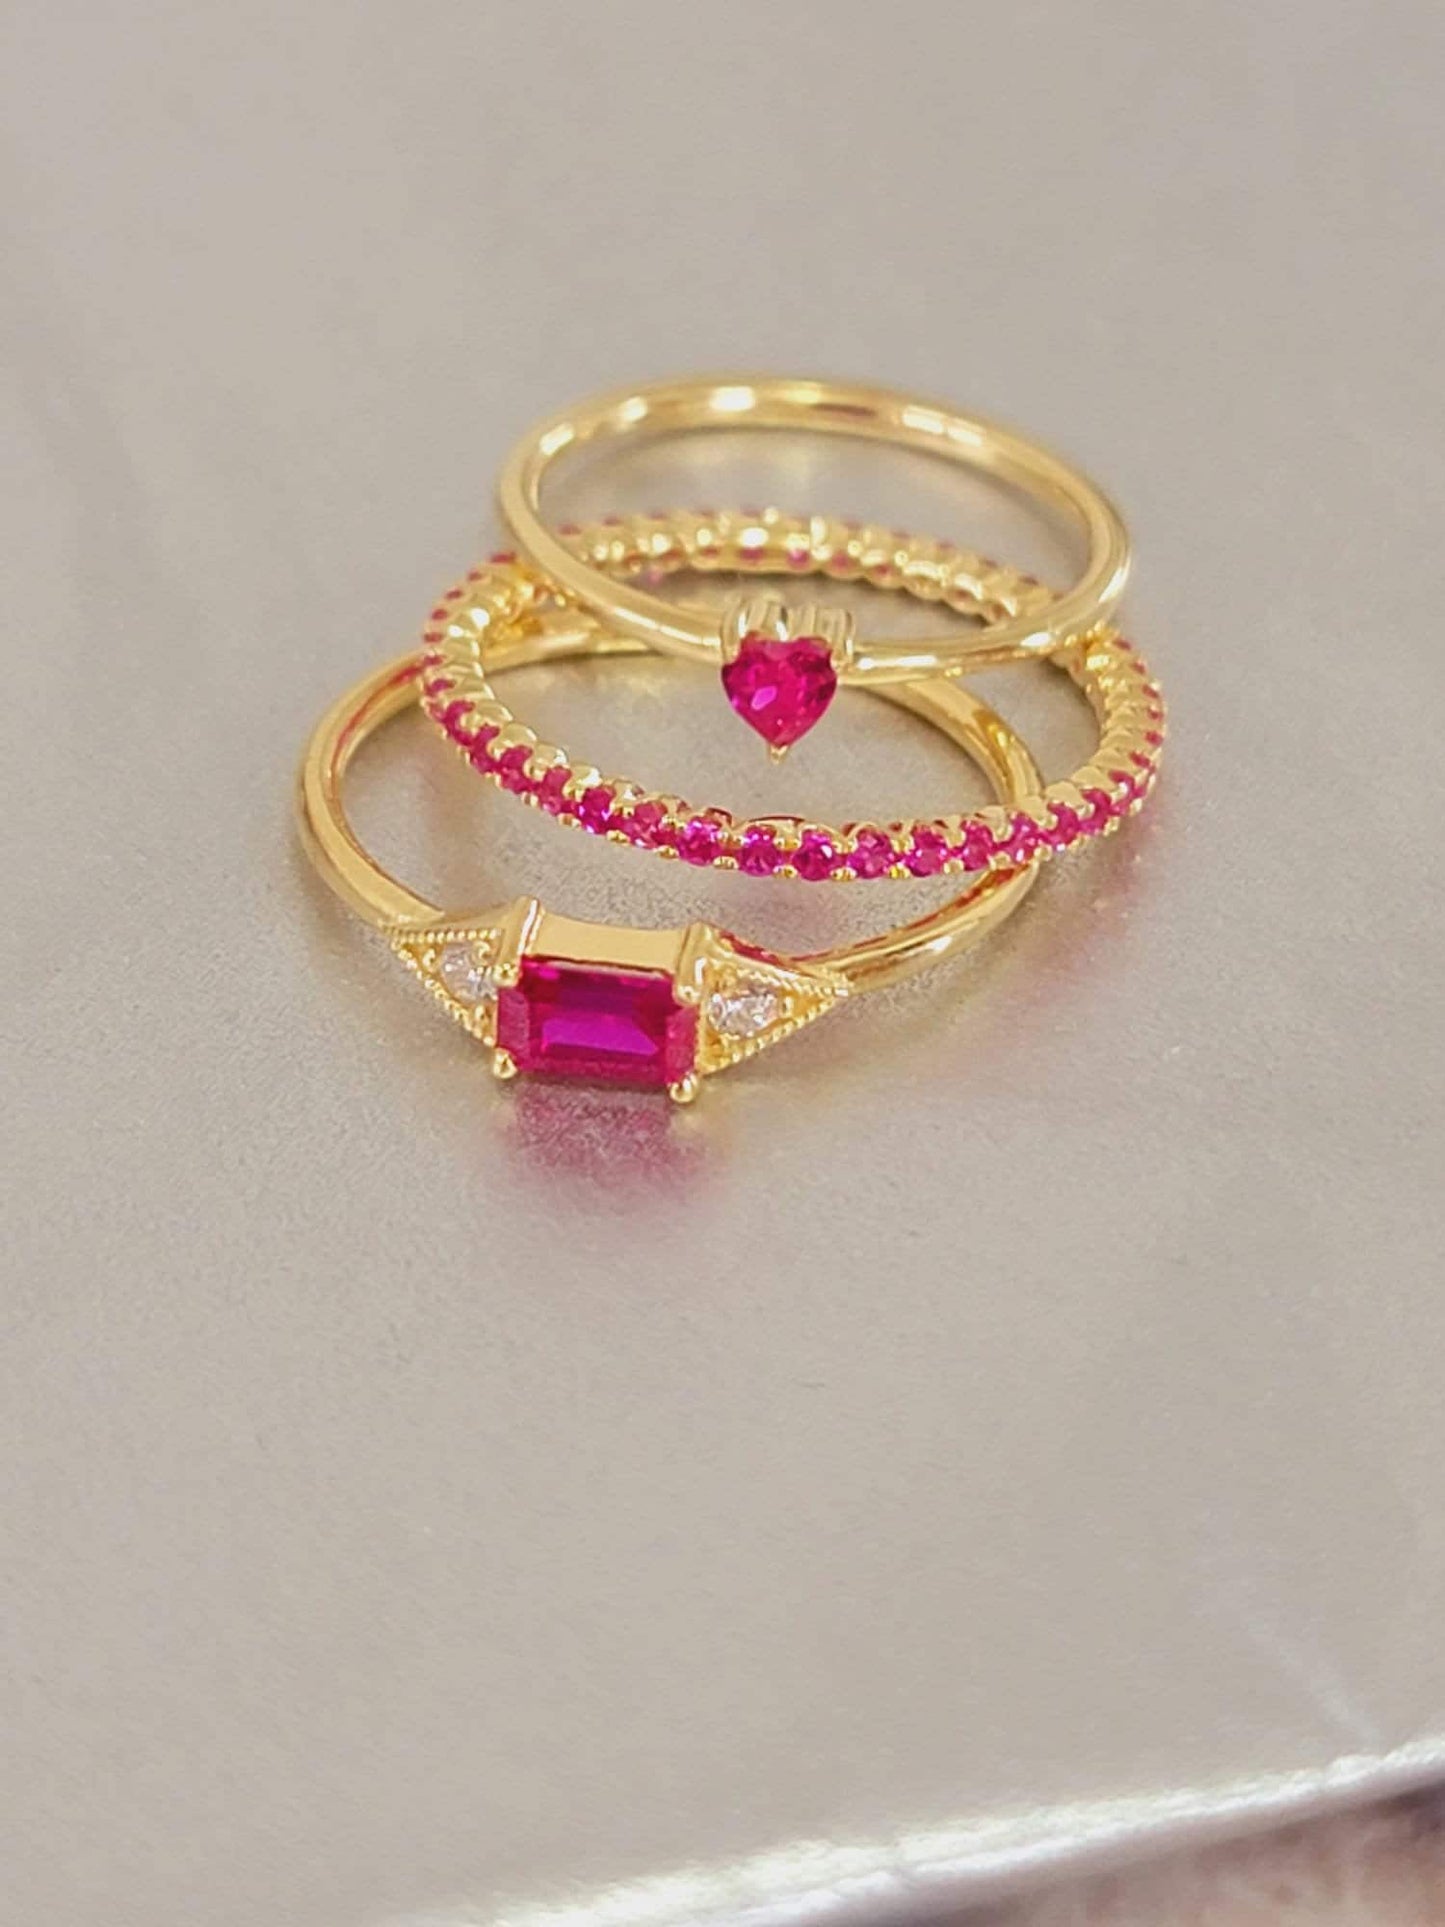 Ruby and Diamond Ring, Stackable Ring 14k Gold, Natural Ruby, Victorian Ruby Ring, July Birthstone Ring, Anniversary Gift, Statement Ring